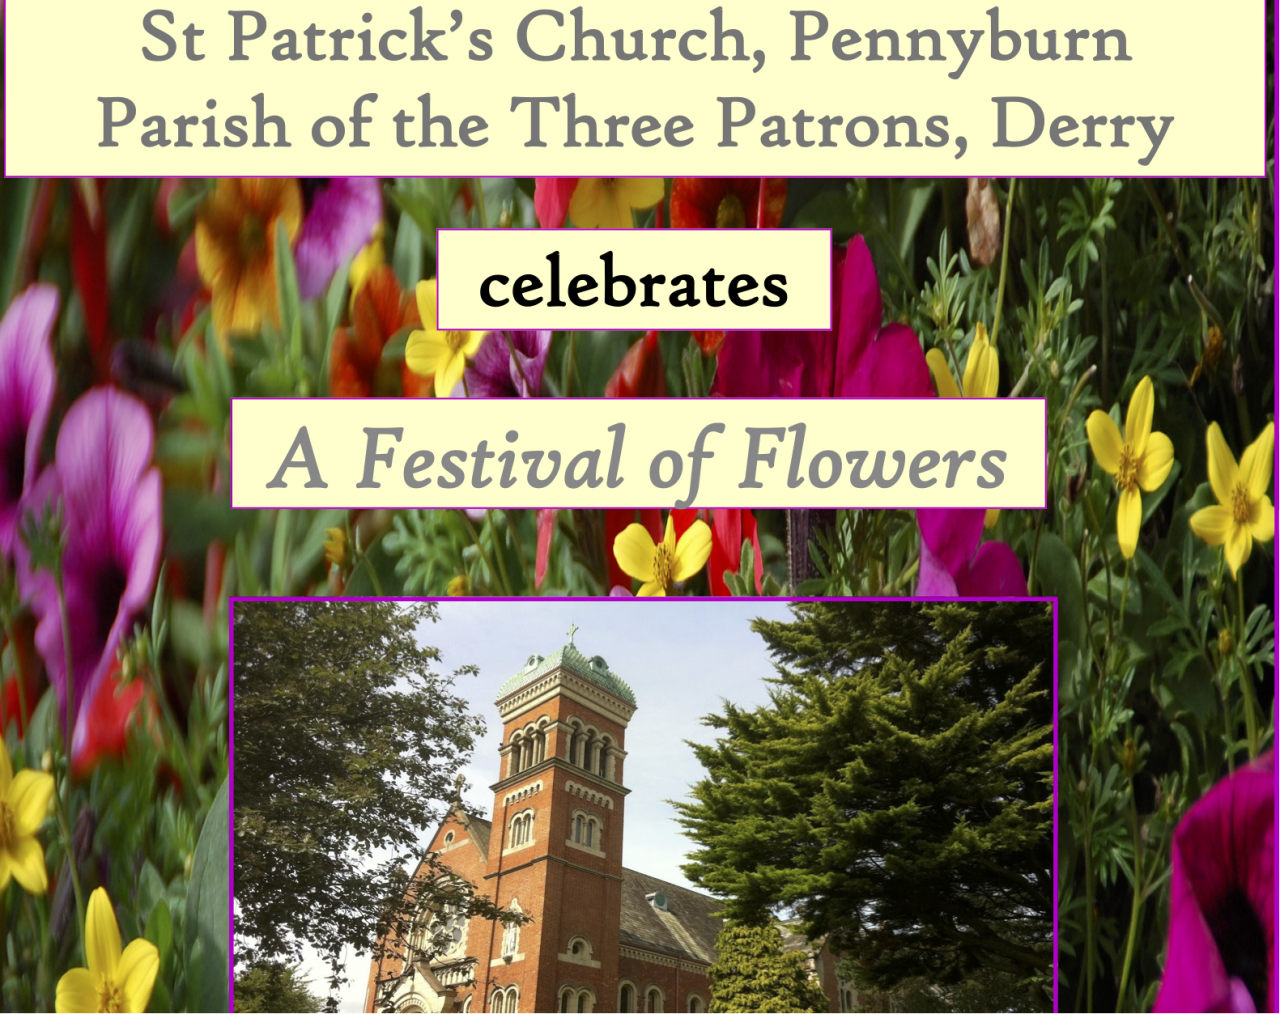 Festival of Flowers at St Patrick's Pennyburn - 3rd to 5th June 2017